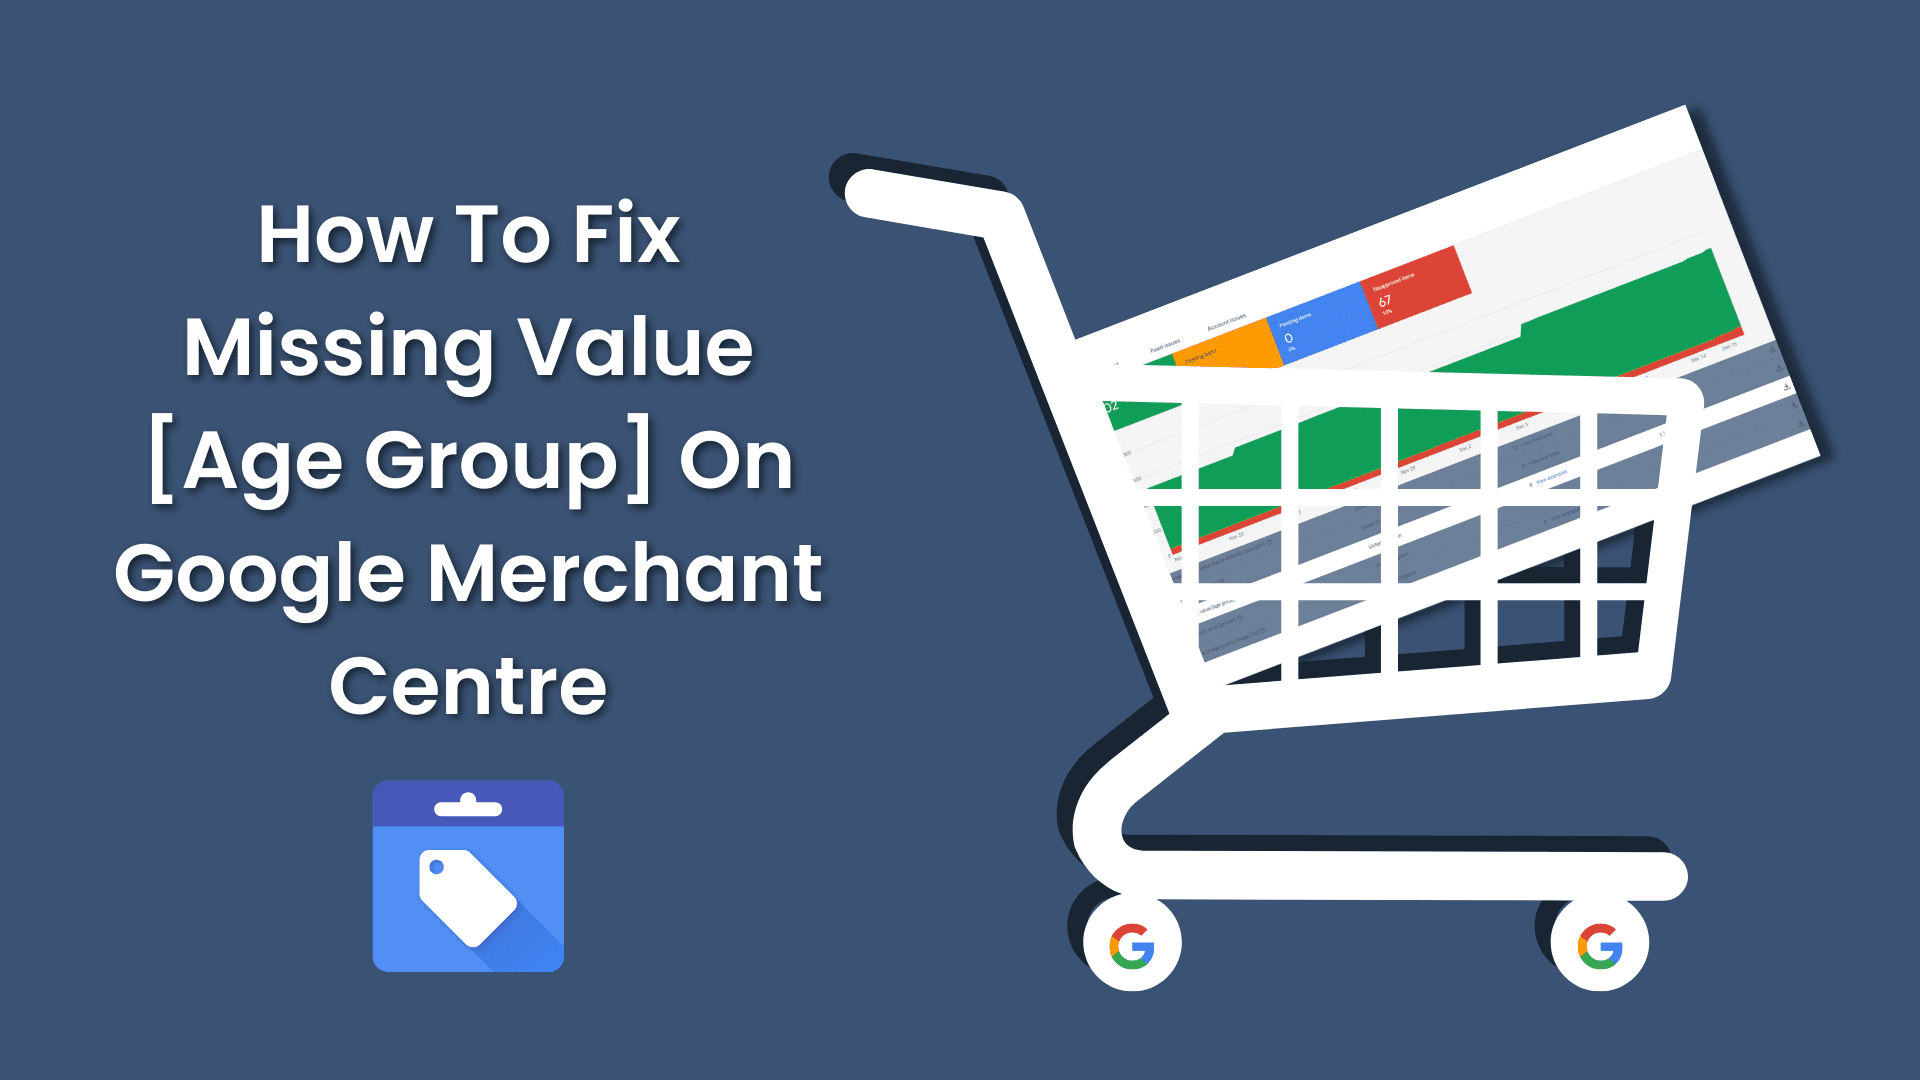 How To Fix Missing Value [age group]- Merchant Centre Disapproved Products